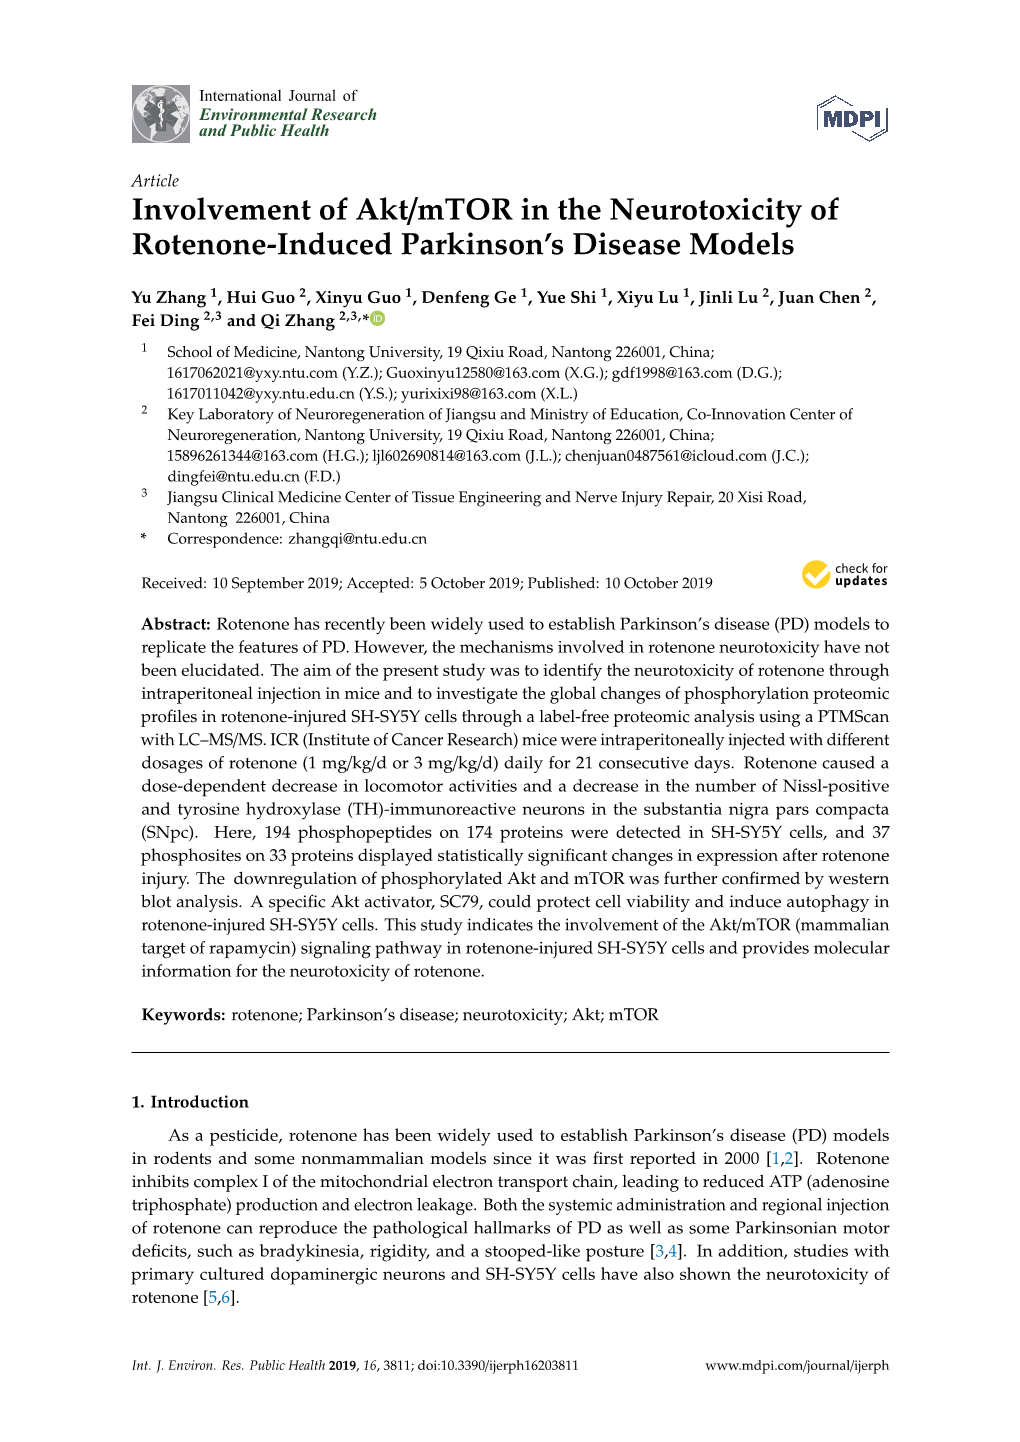 Involvement of Akt/Mtor in the Neurotoxicity of Rotenone-Induced Parkinson’S Disease Models